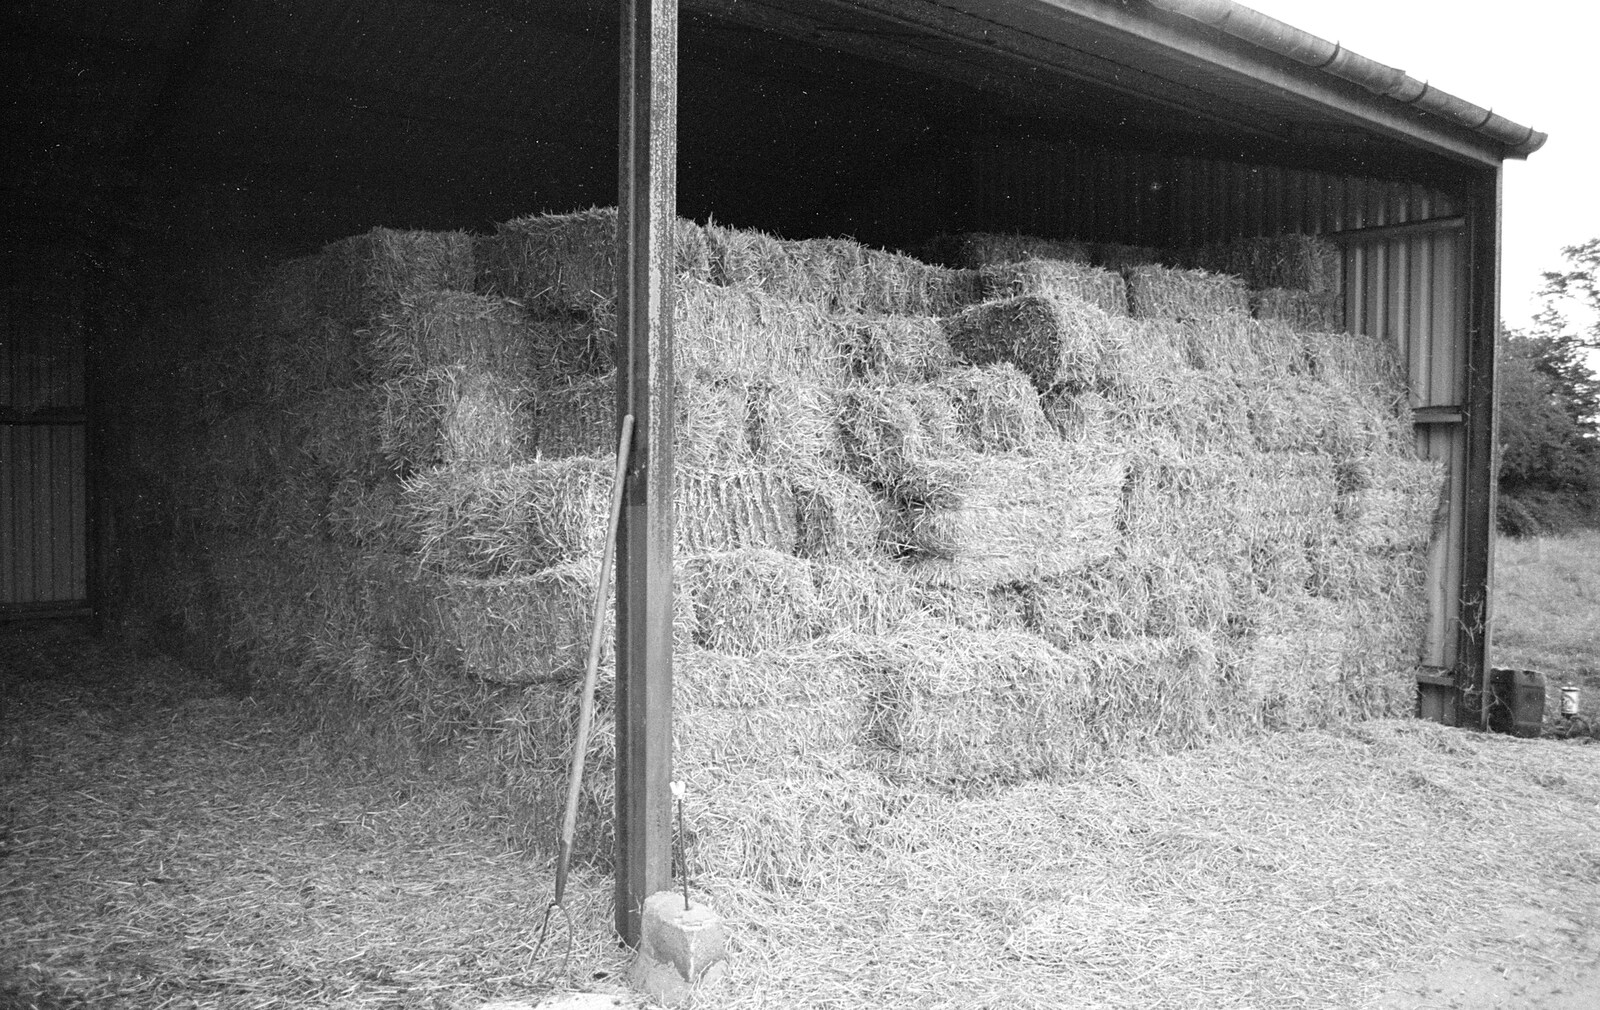 The bales are all stacked away from Working on the Harvest, Tibenham, Norfolk - 11th August 1992